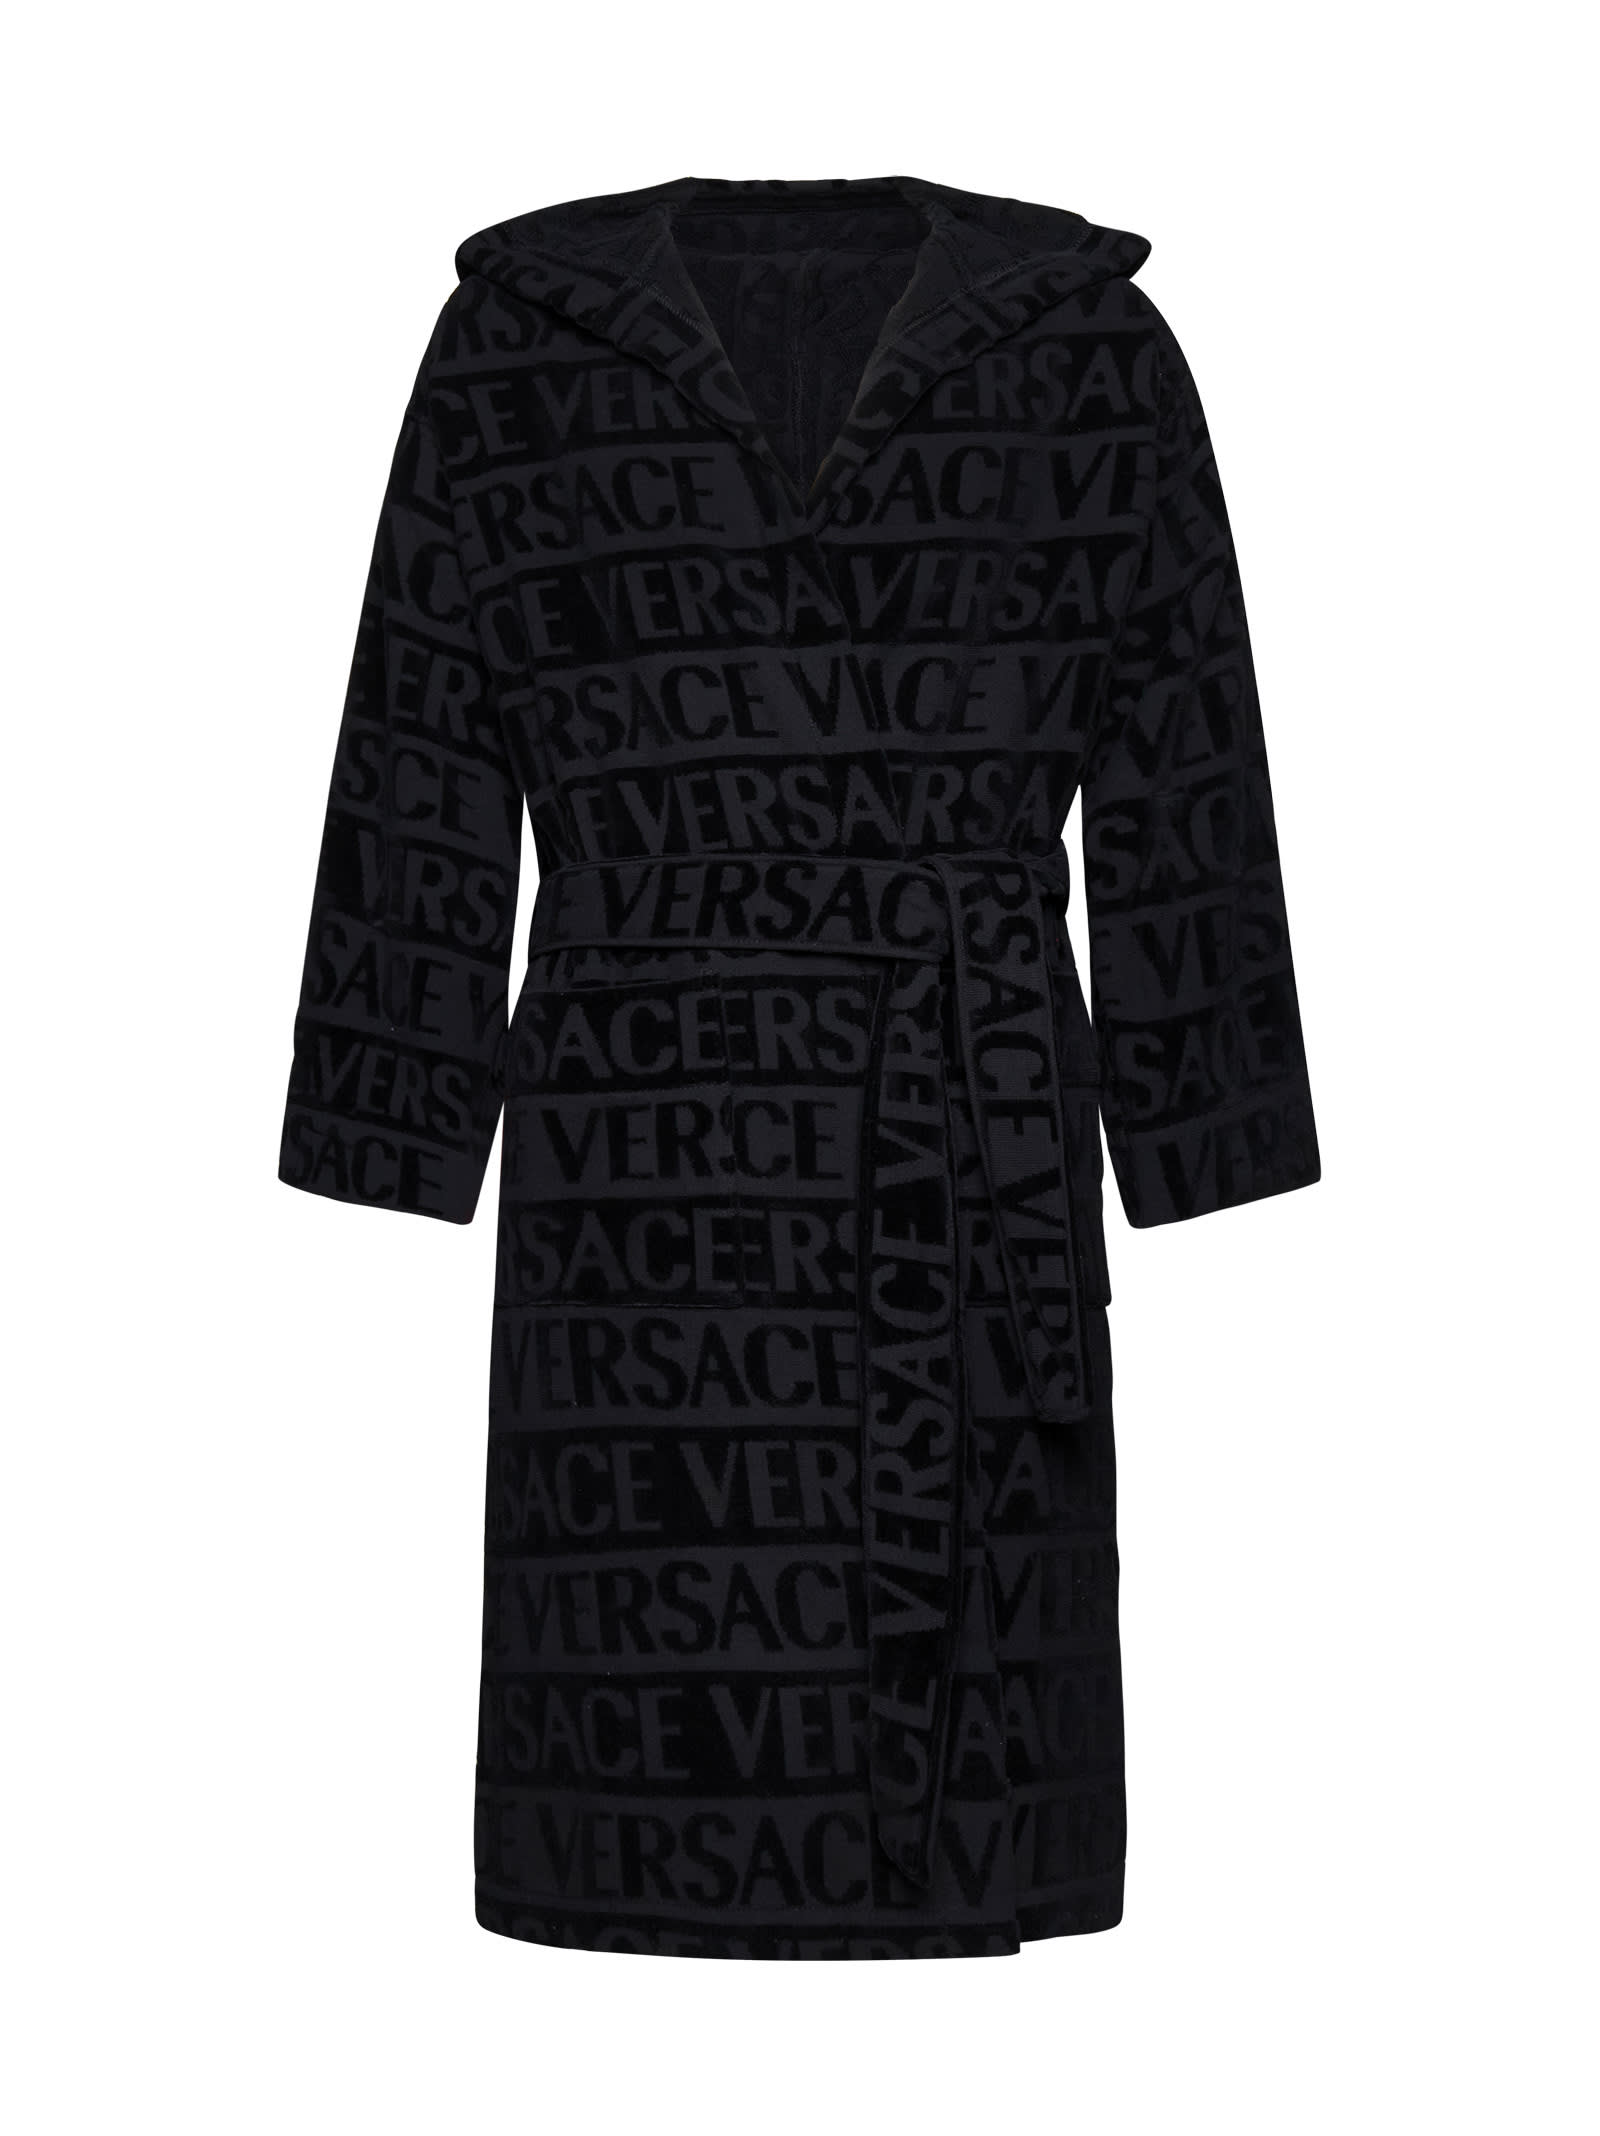 Versace Robes for Men for sale